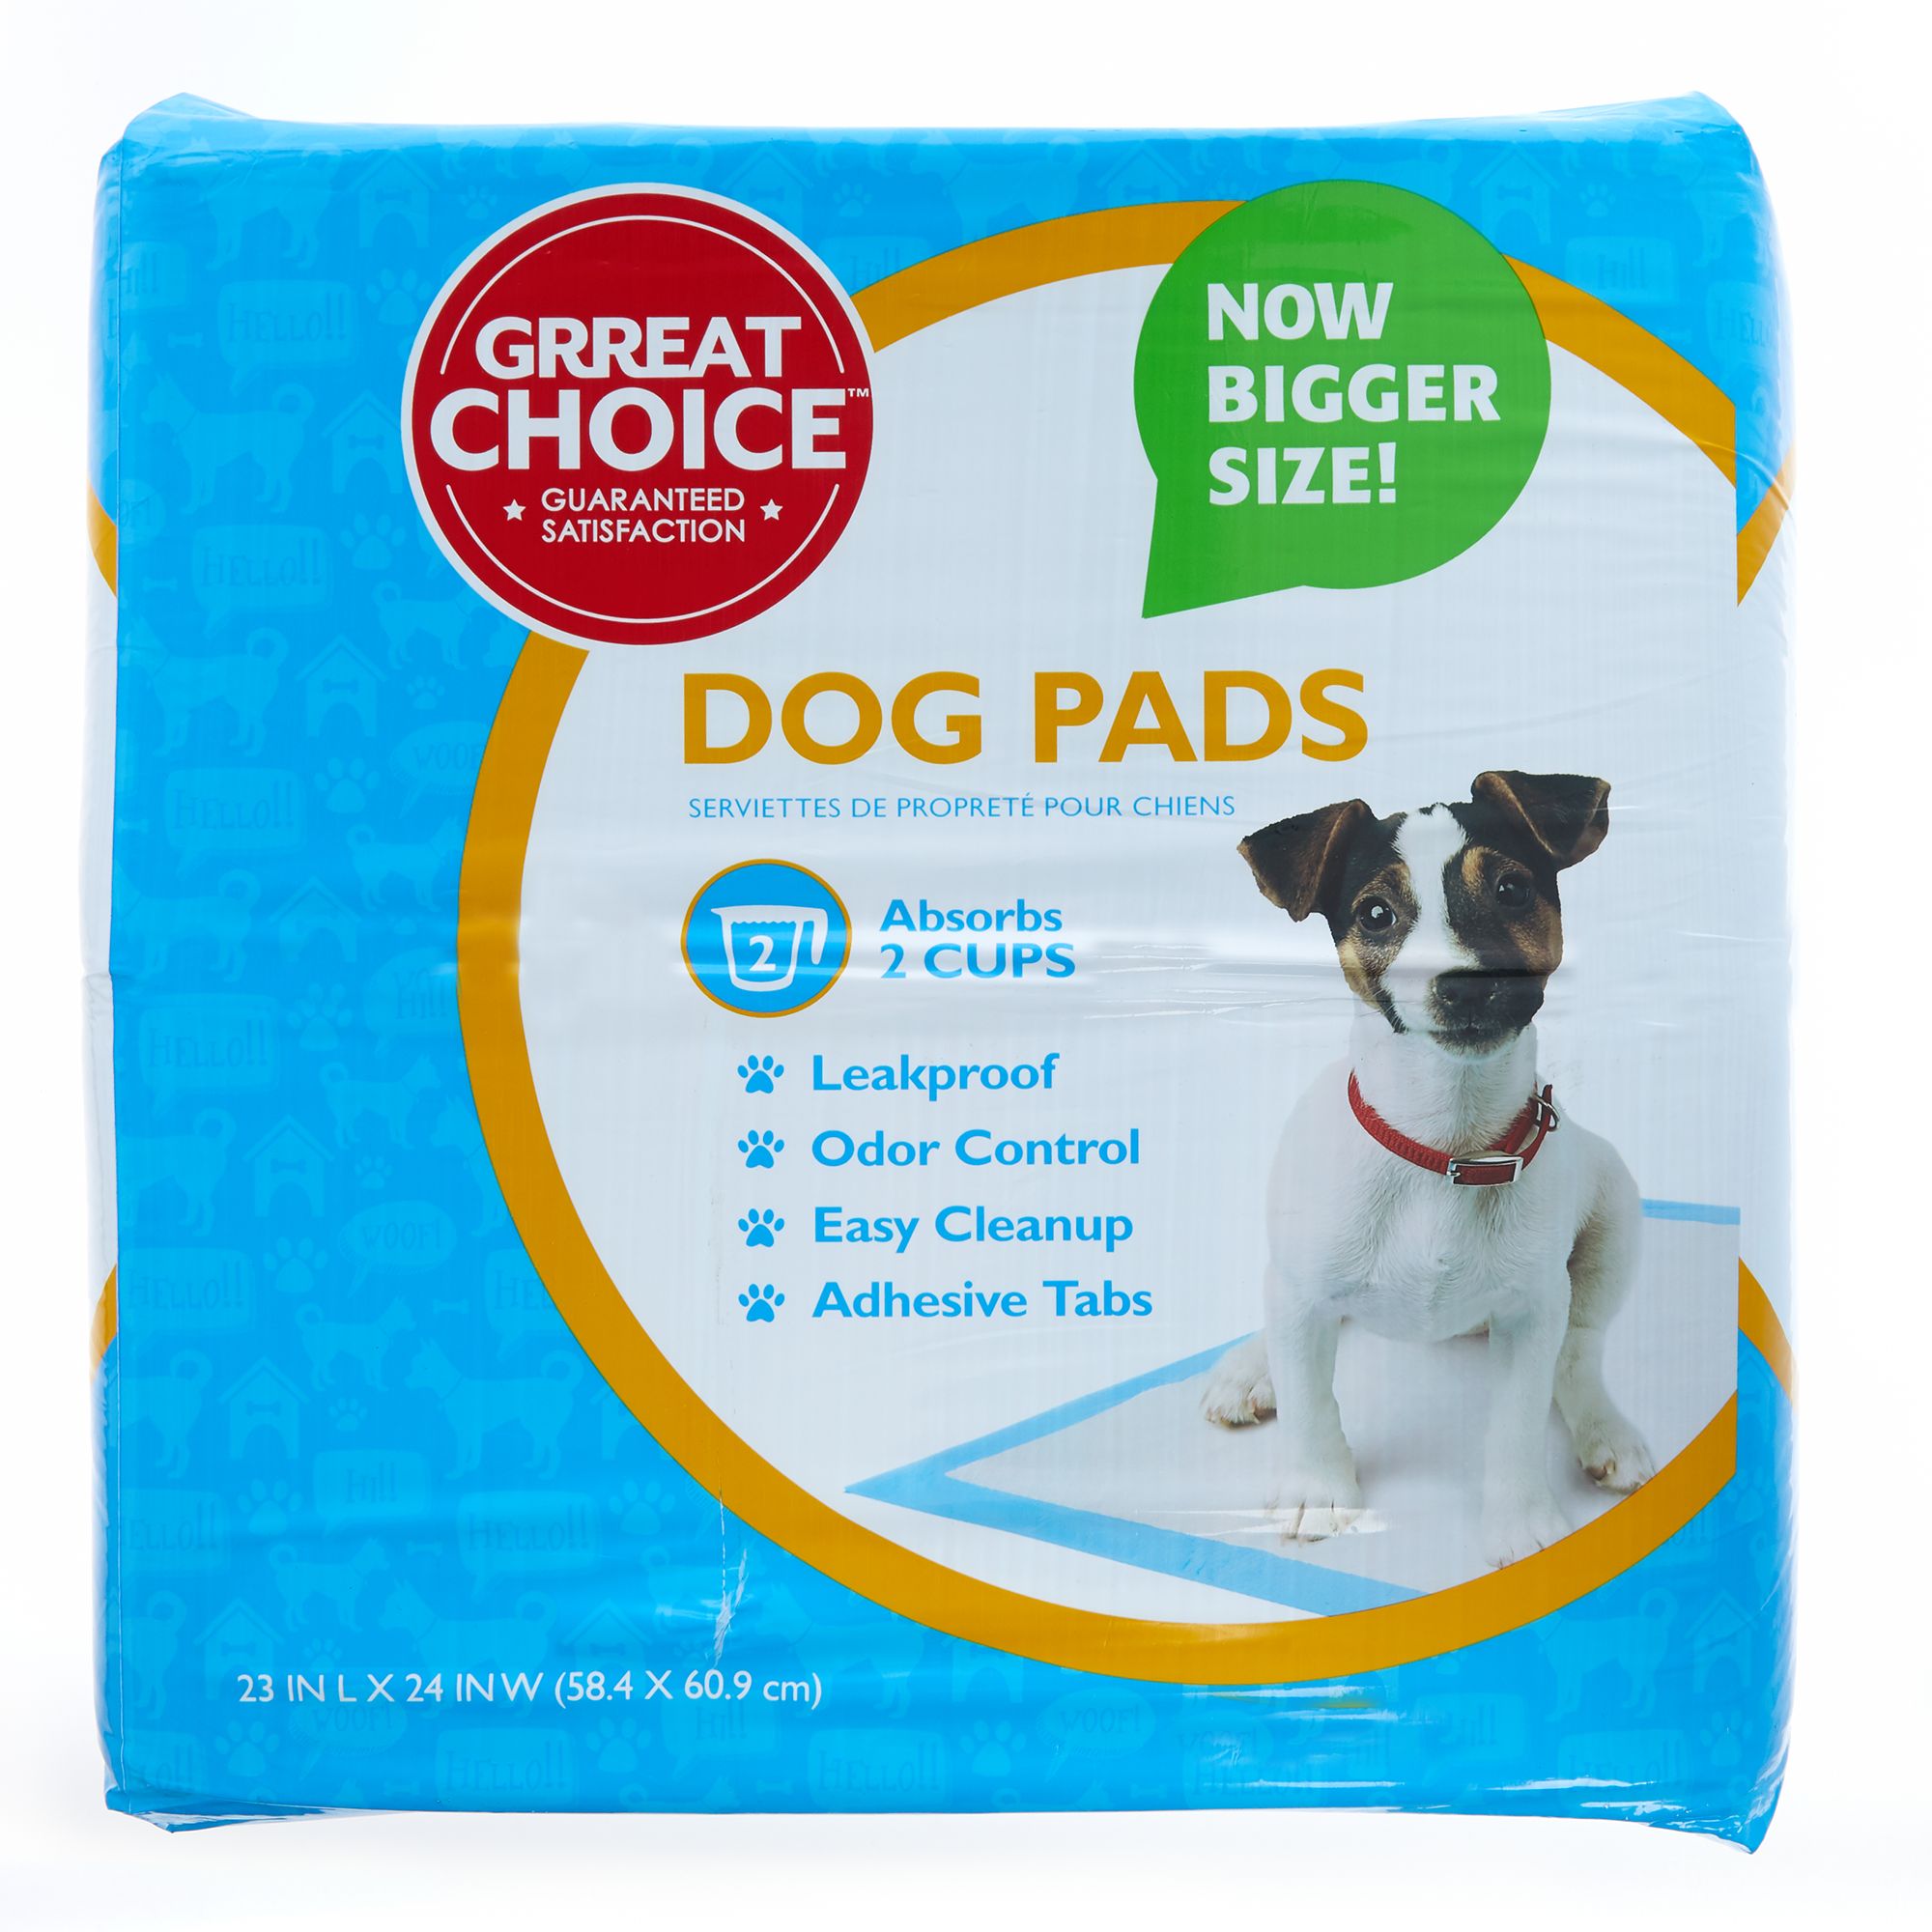 Dog Potty Training - Dog Diapers, Pee Pads & More